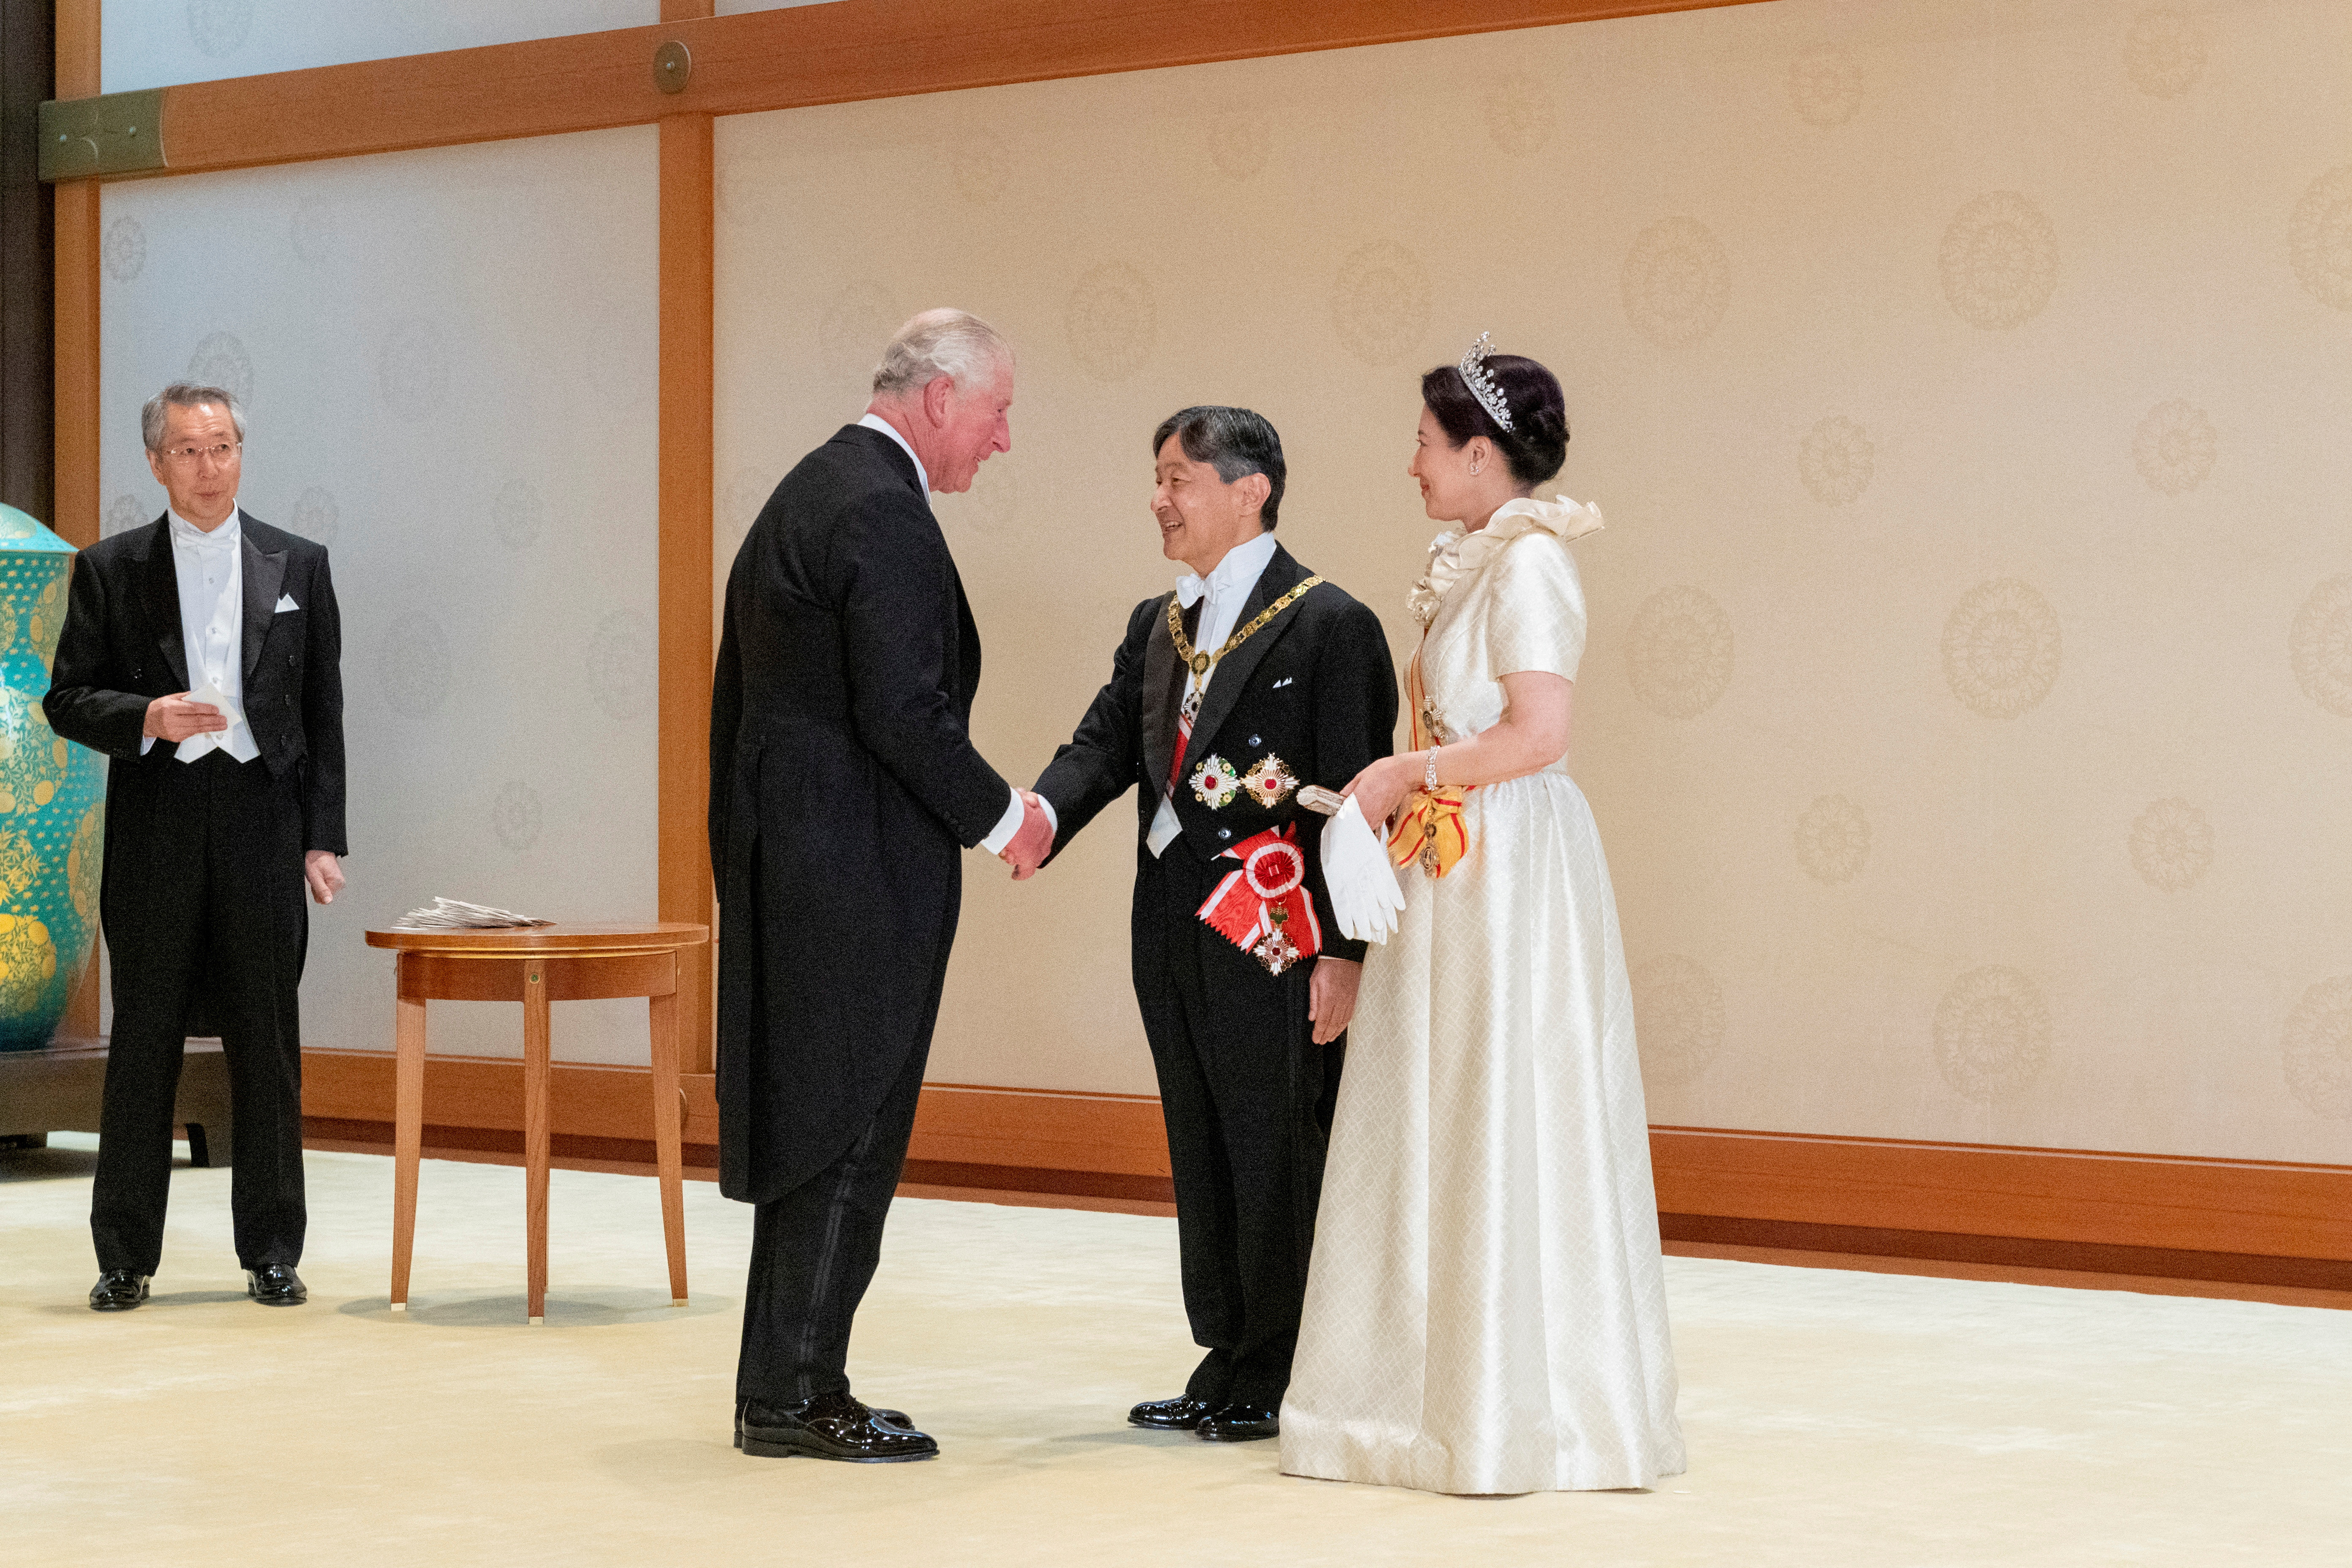 Japan's Emperor Naruhito and Empress Masako welcome Britain's Prince Charles prior to a court banquet at the Imperial Palace in Tokyo